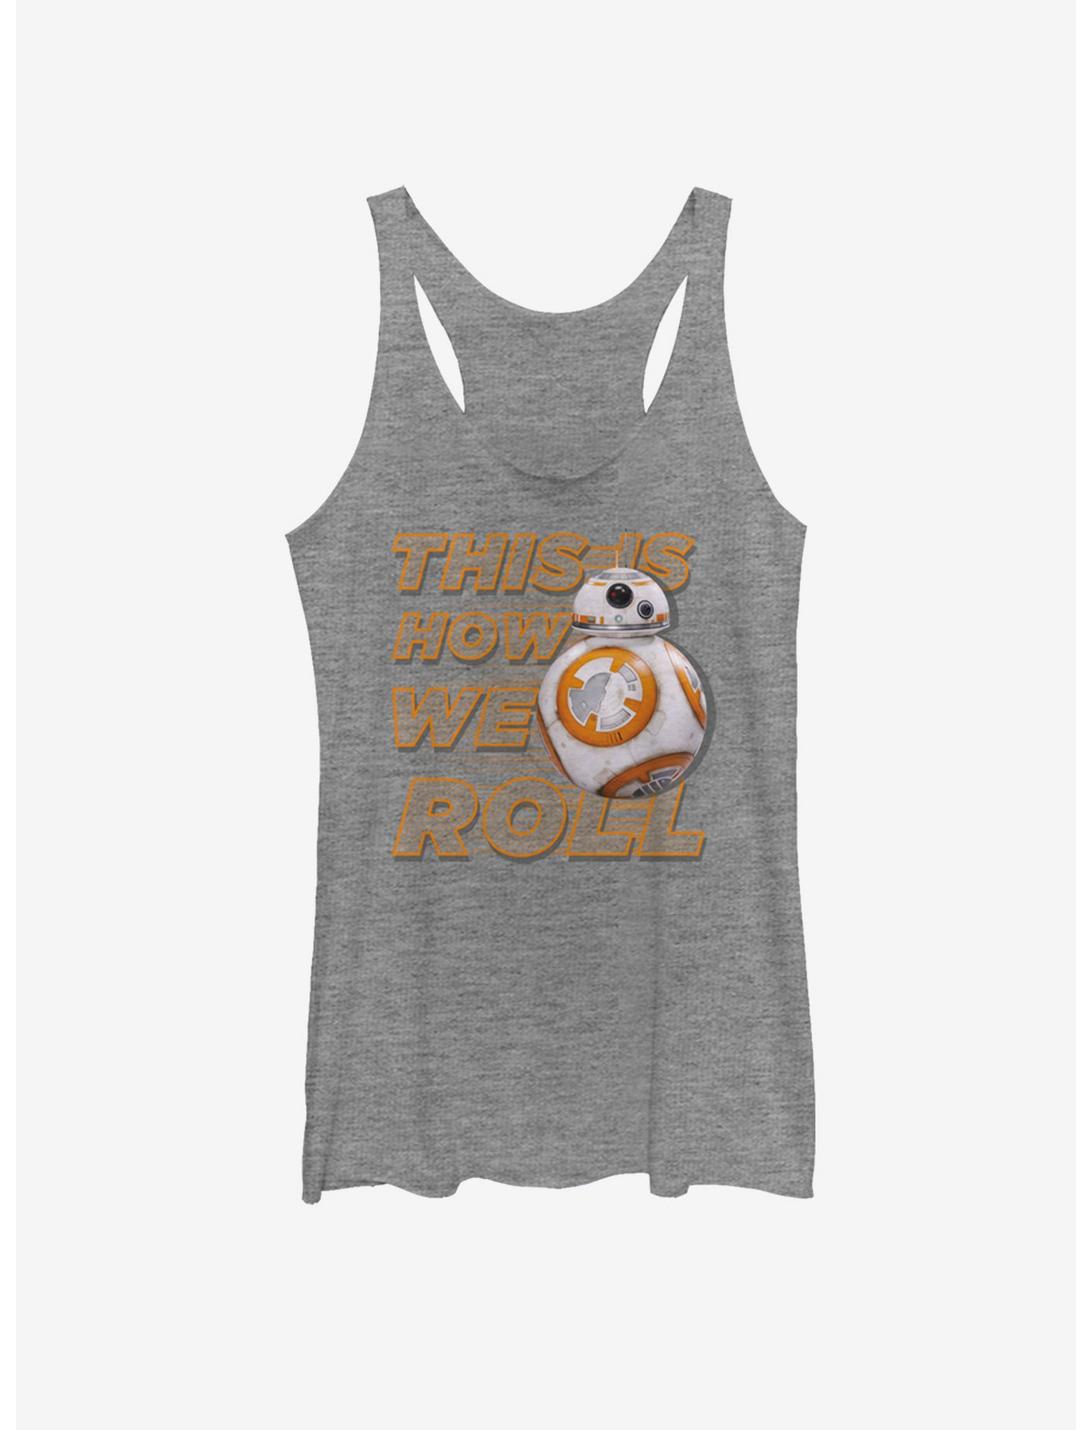 Star Wars This Is How We Roll Front Girls Tank, GRAY HTR, hi-res